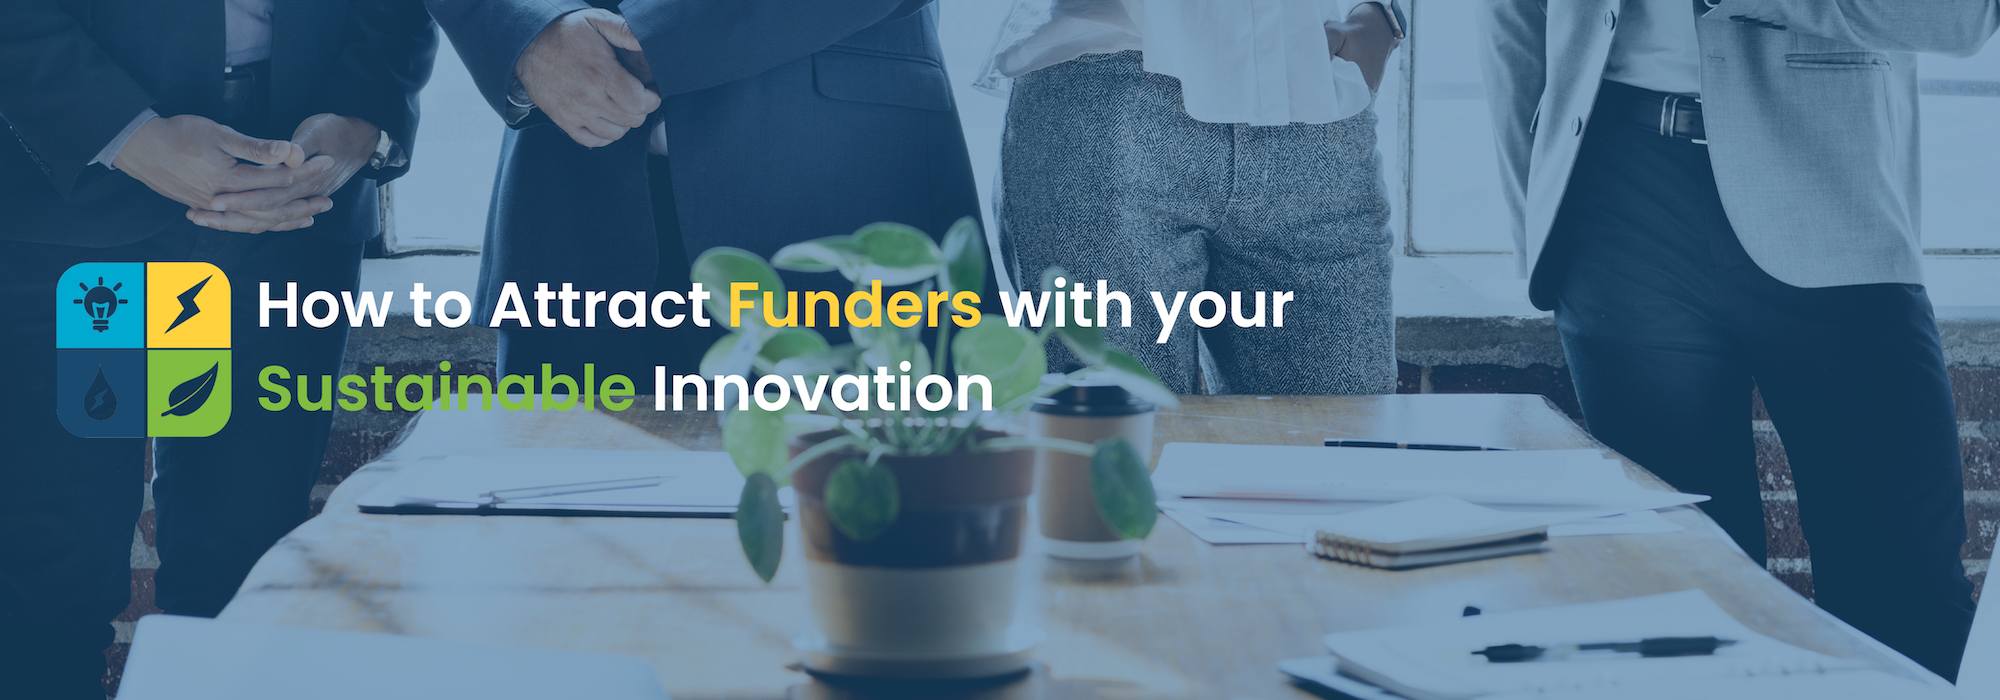 How To Attract Funders With Your Sustainable Innovation